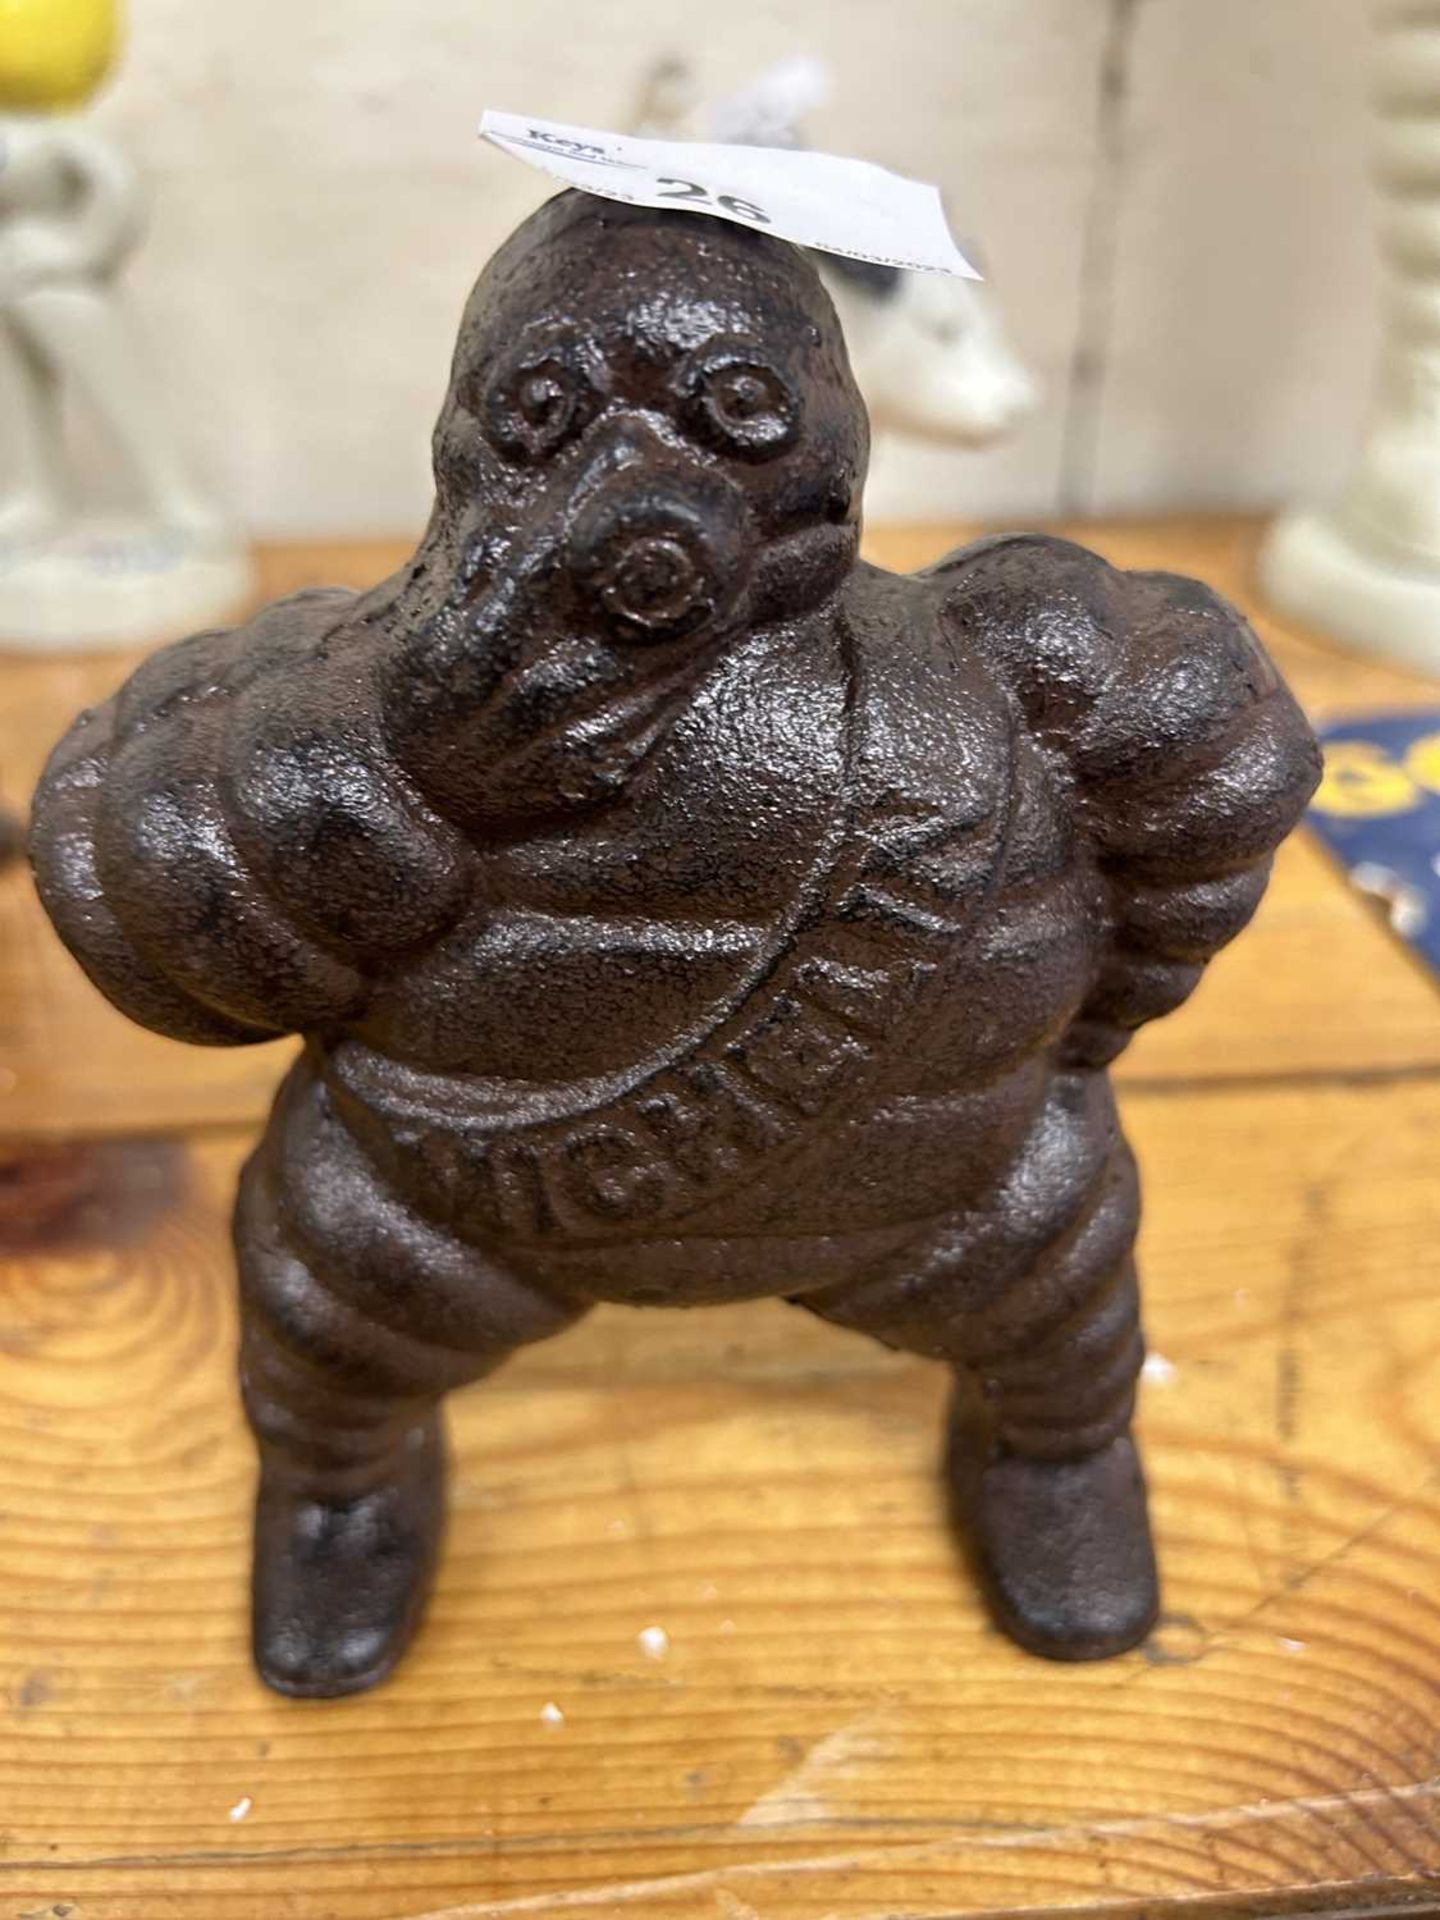 Cast Michelin Man statue, height approx 16cm